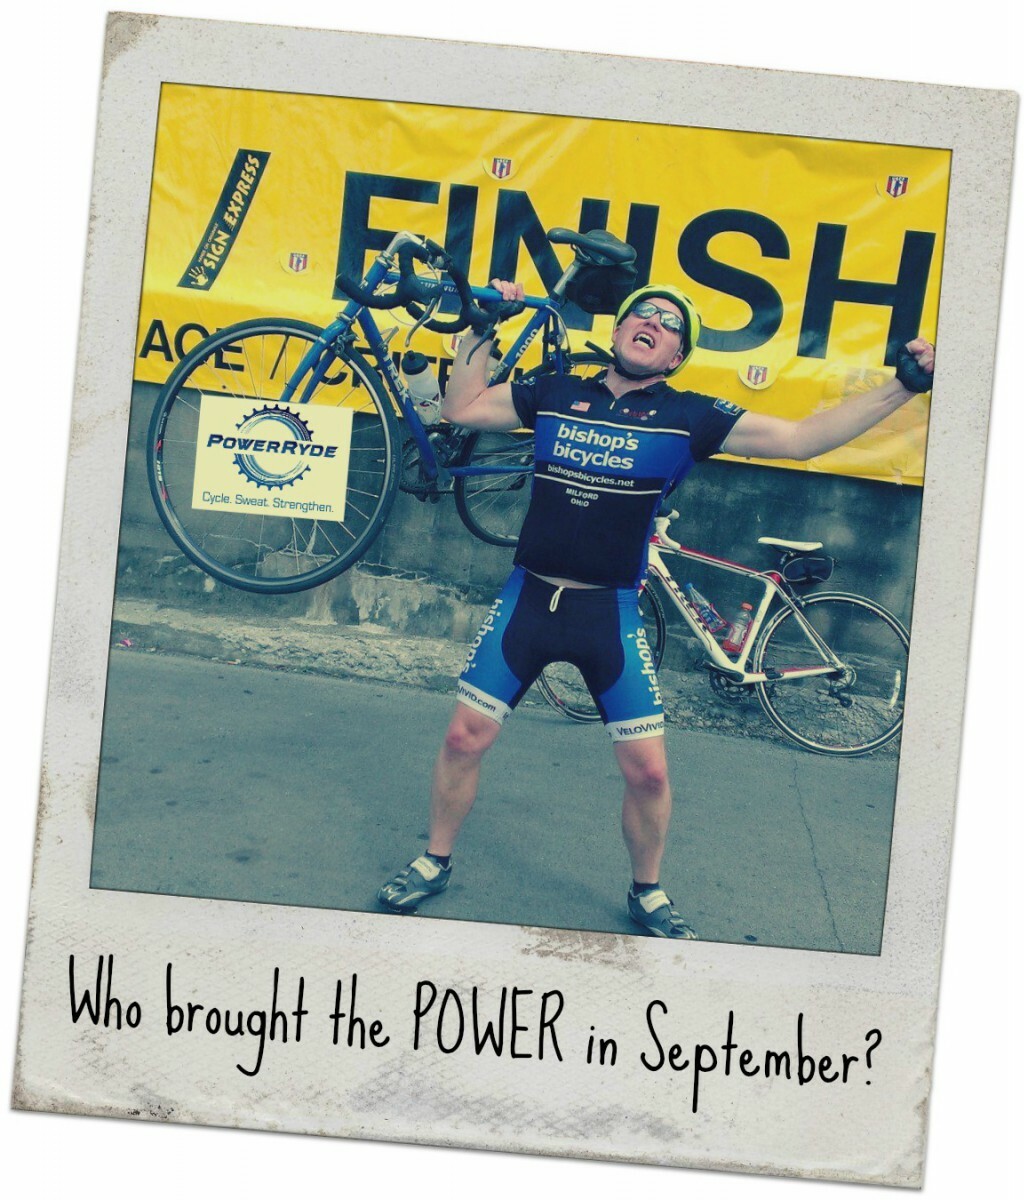 Polaroid style picture of John Buttram holding a bike with 'Who Brought the POWER in September'?